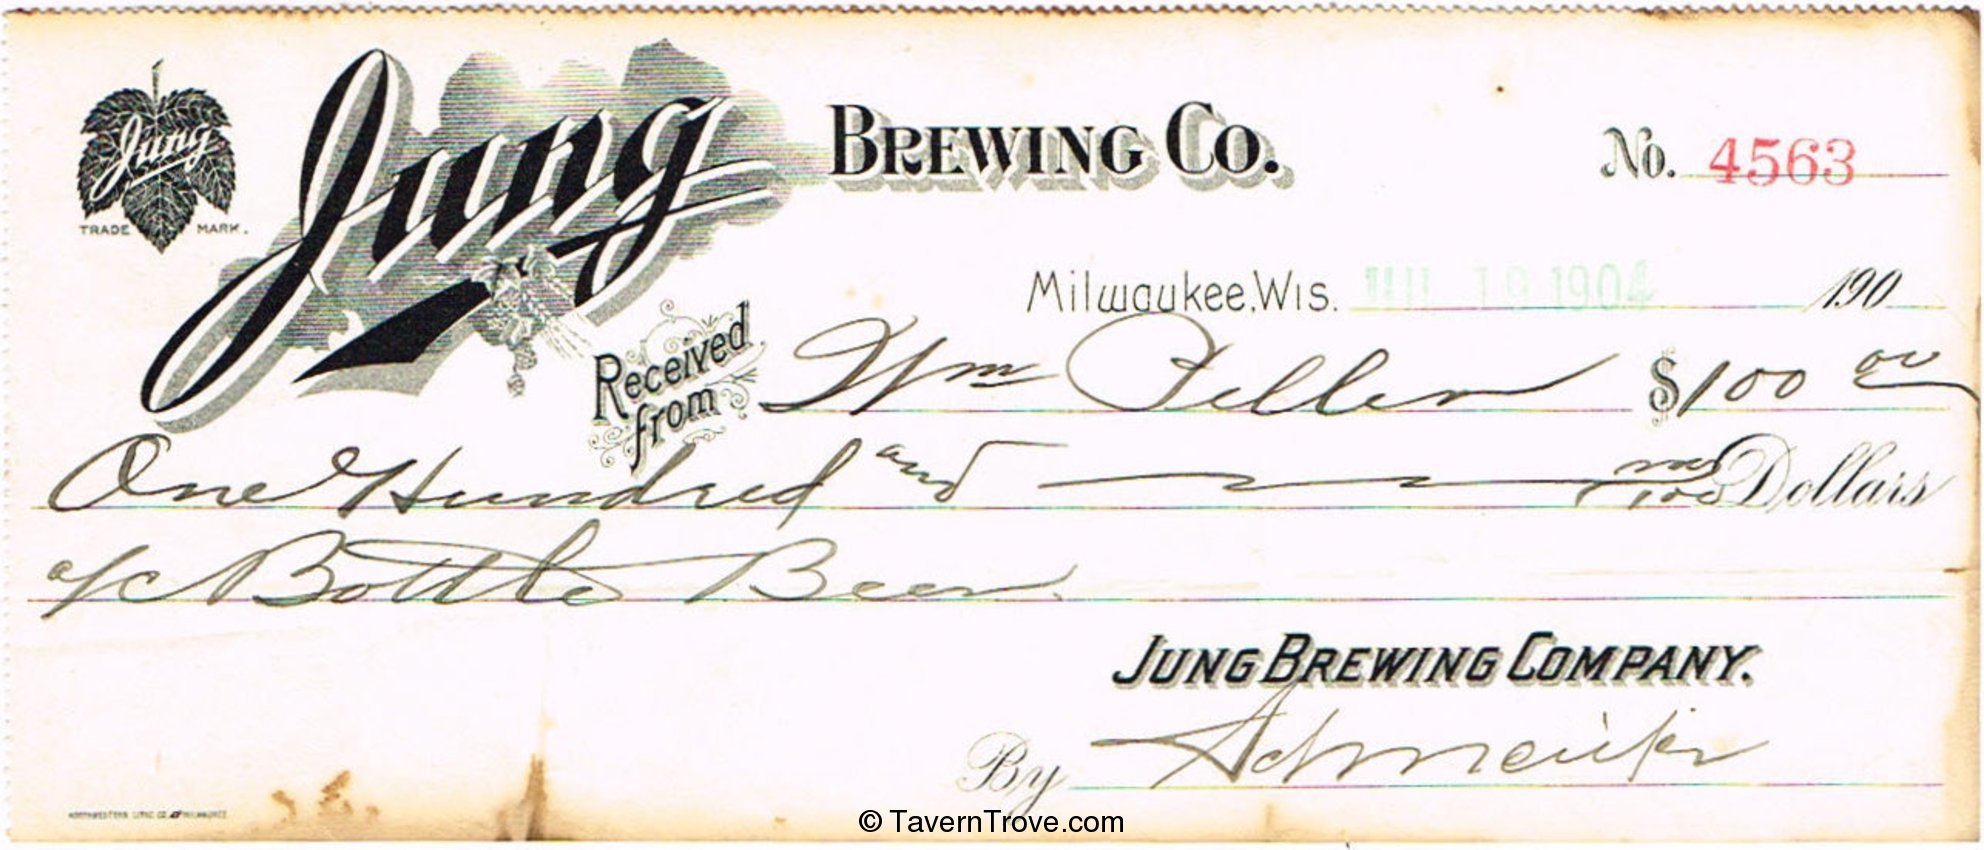 Jung Brewing Co.